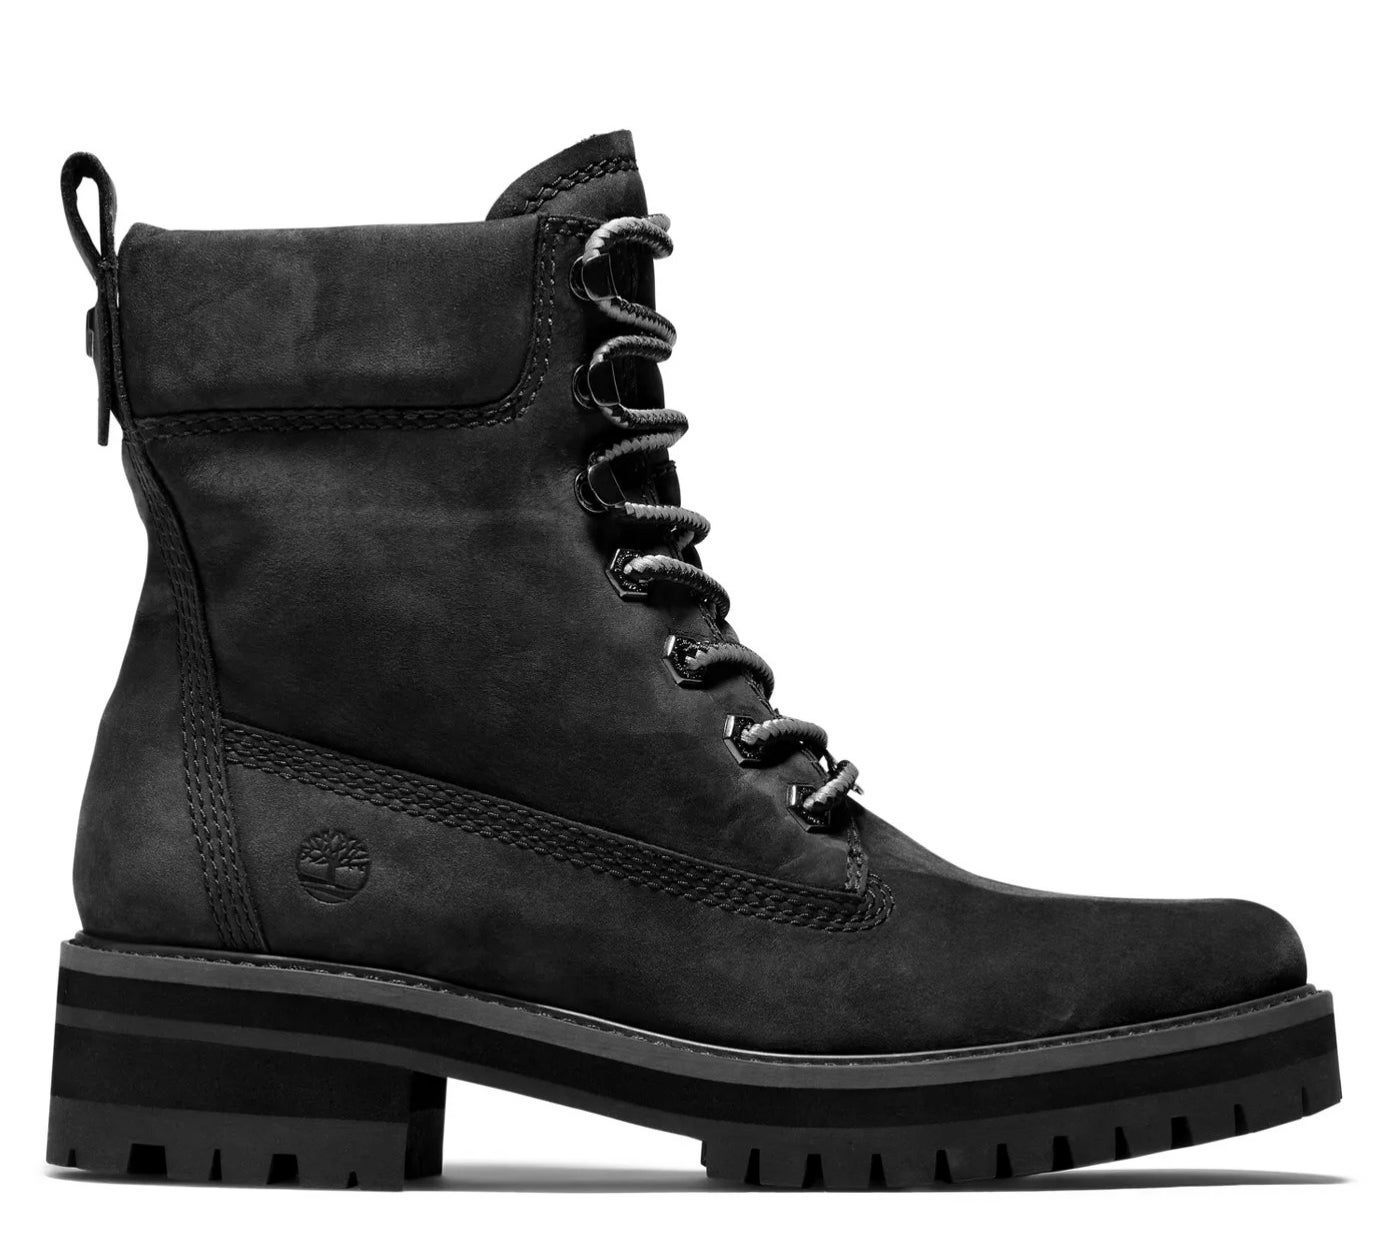 The pair of Timberland boots in black